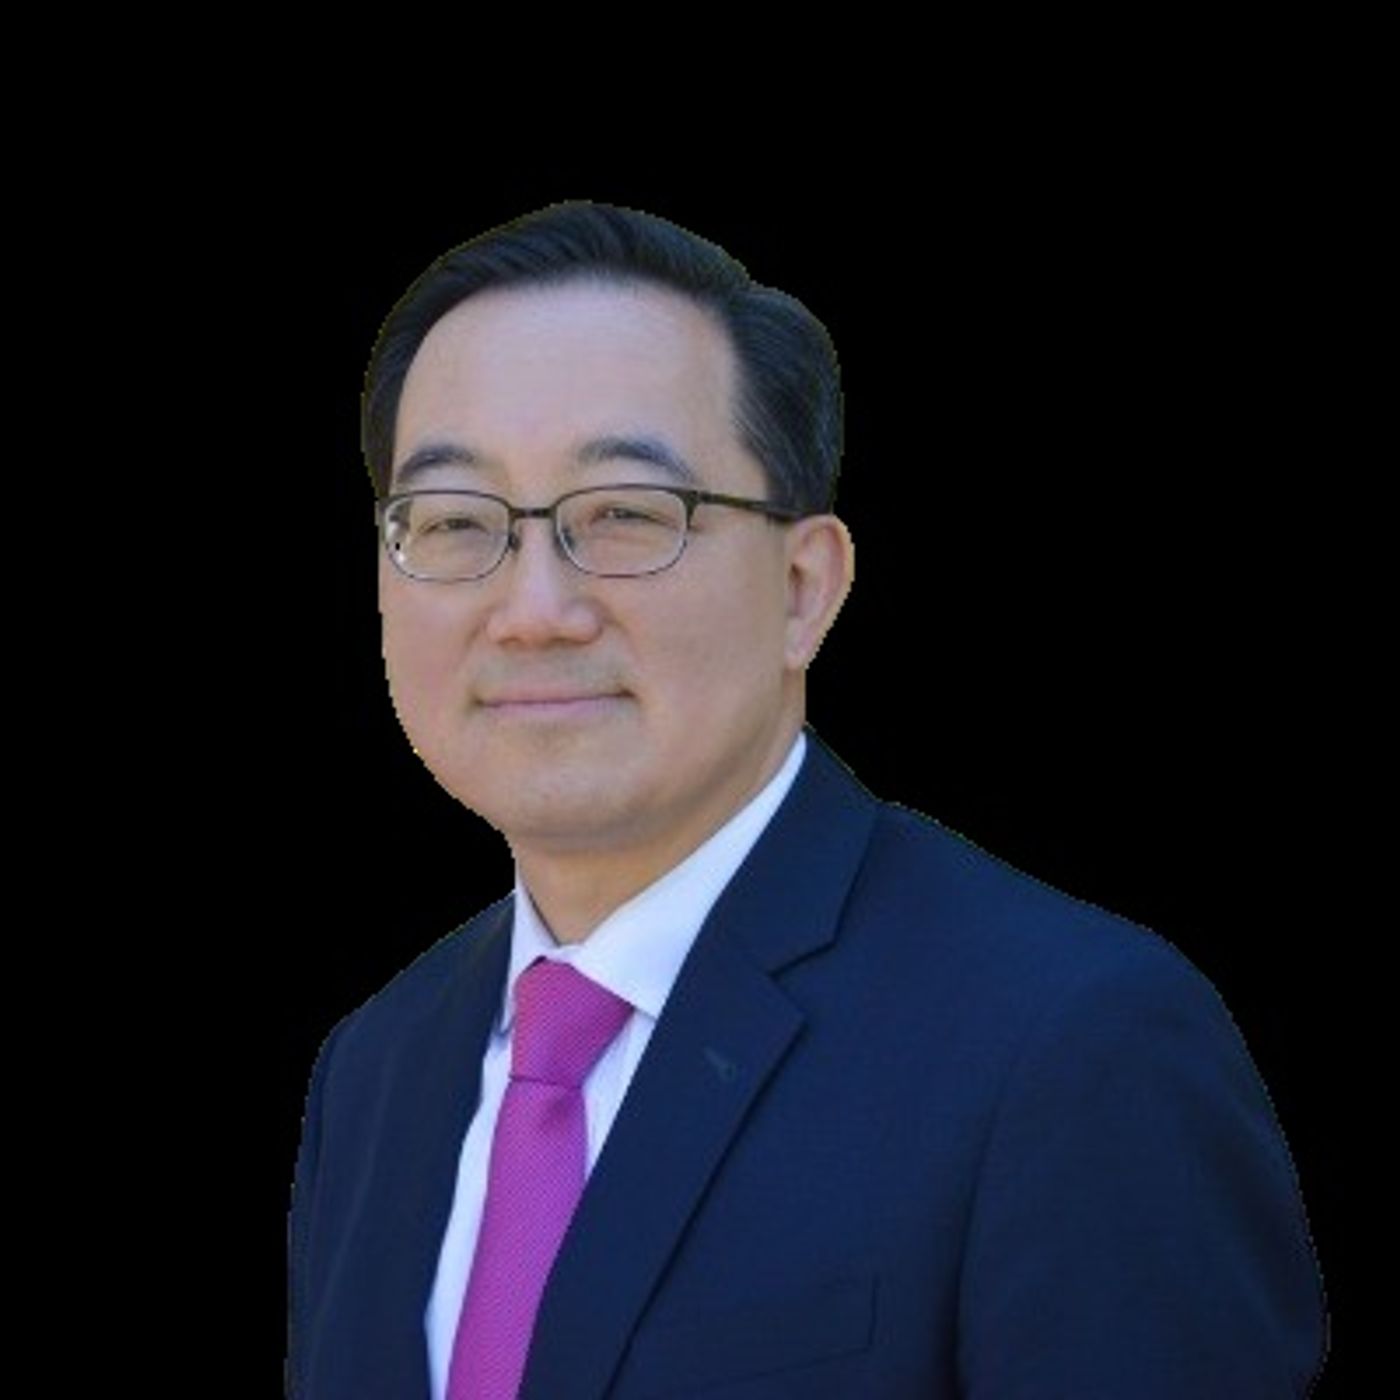 Interview With Stephen Ng, CLU, ChFC, CEP Founder of Stephen Ng Financial Group – Utilizing Long-Term Care to Leverage Retirement Wealth